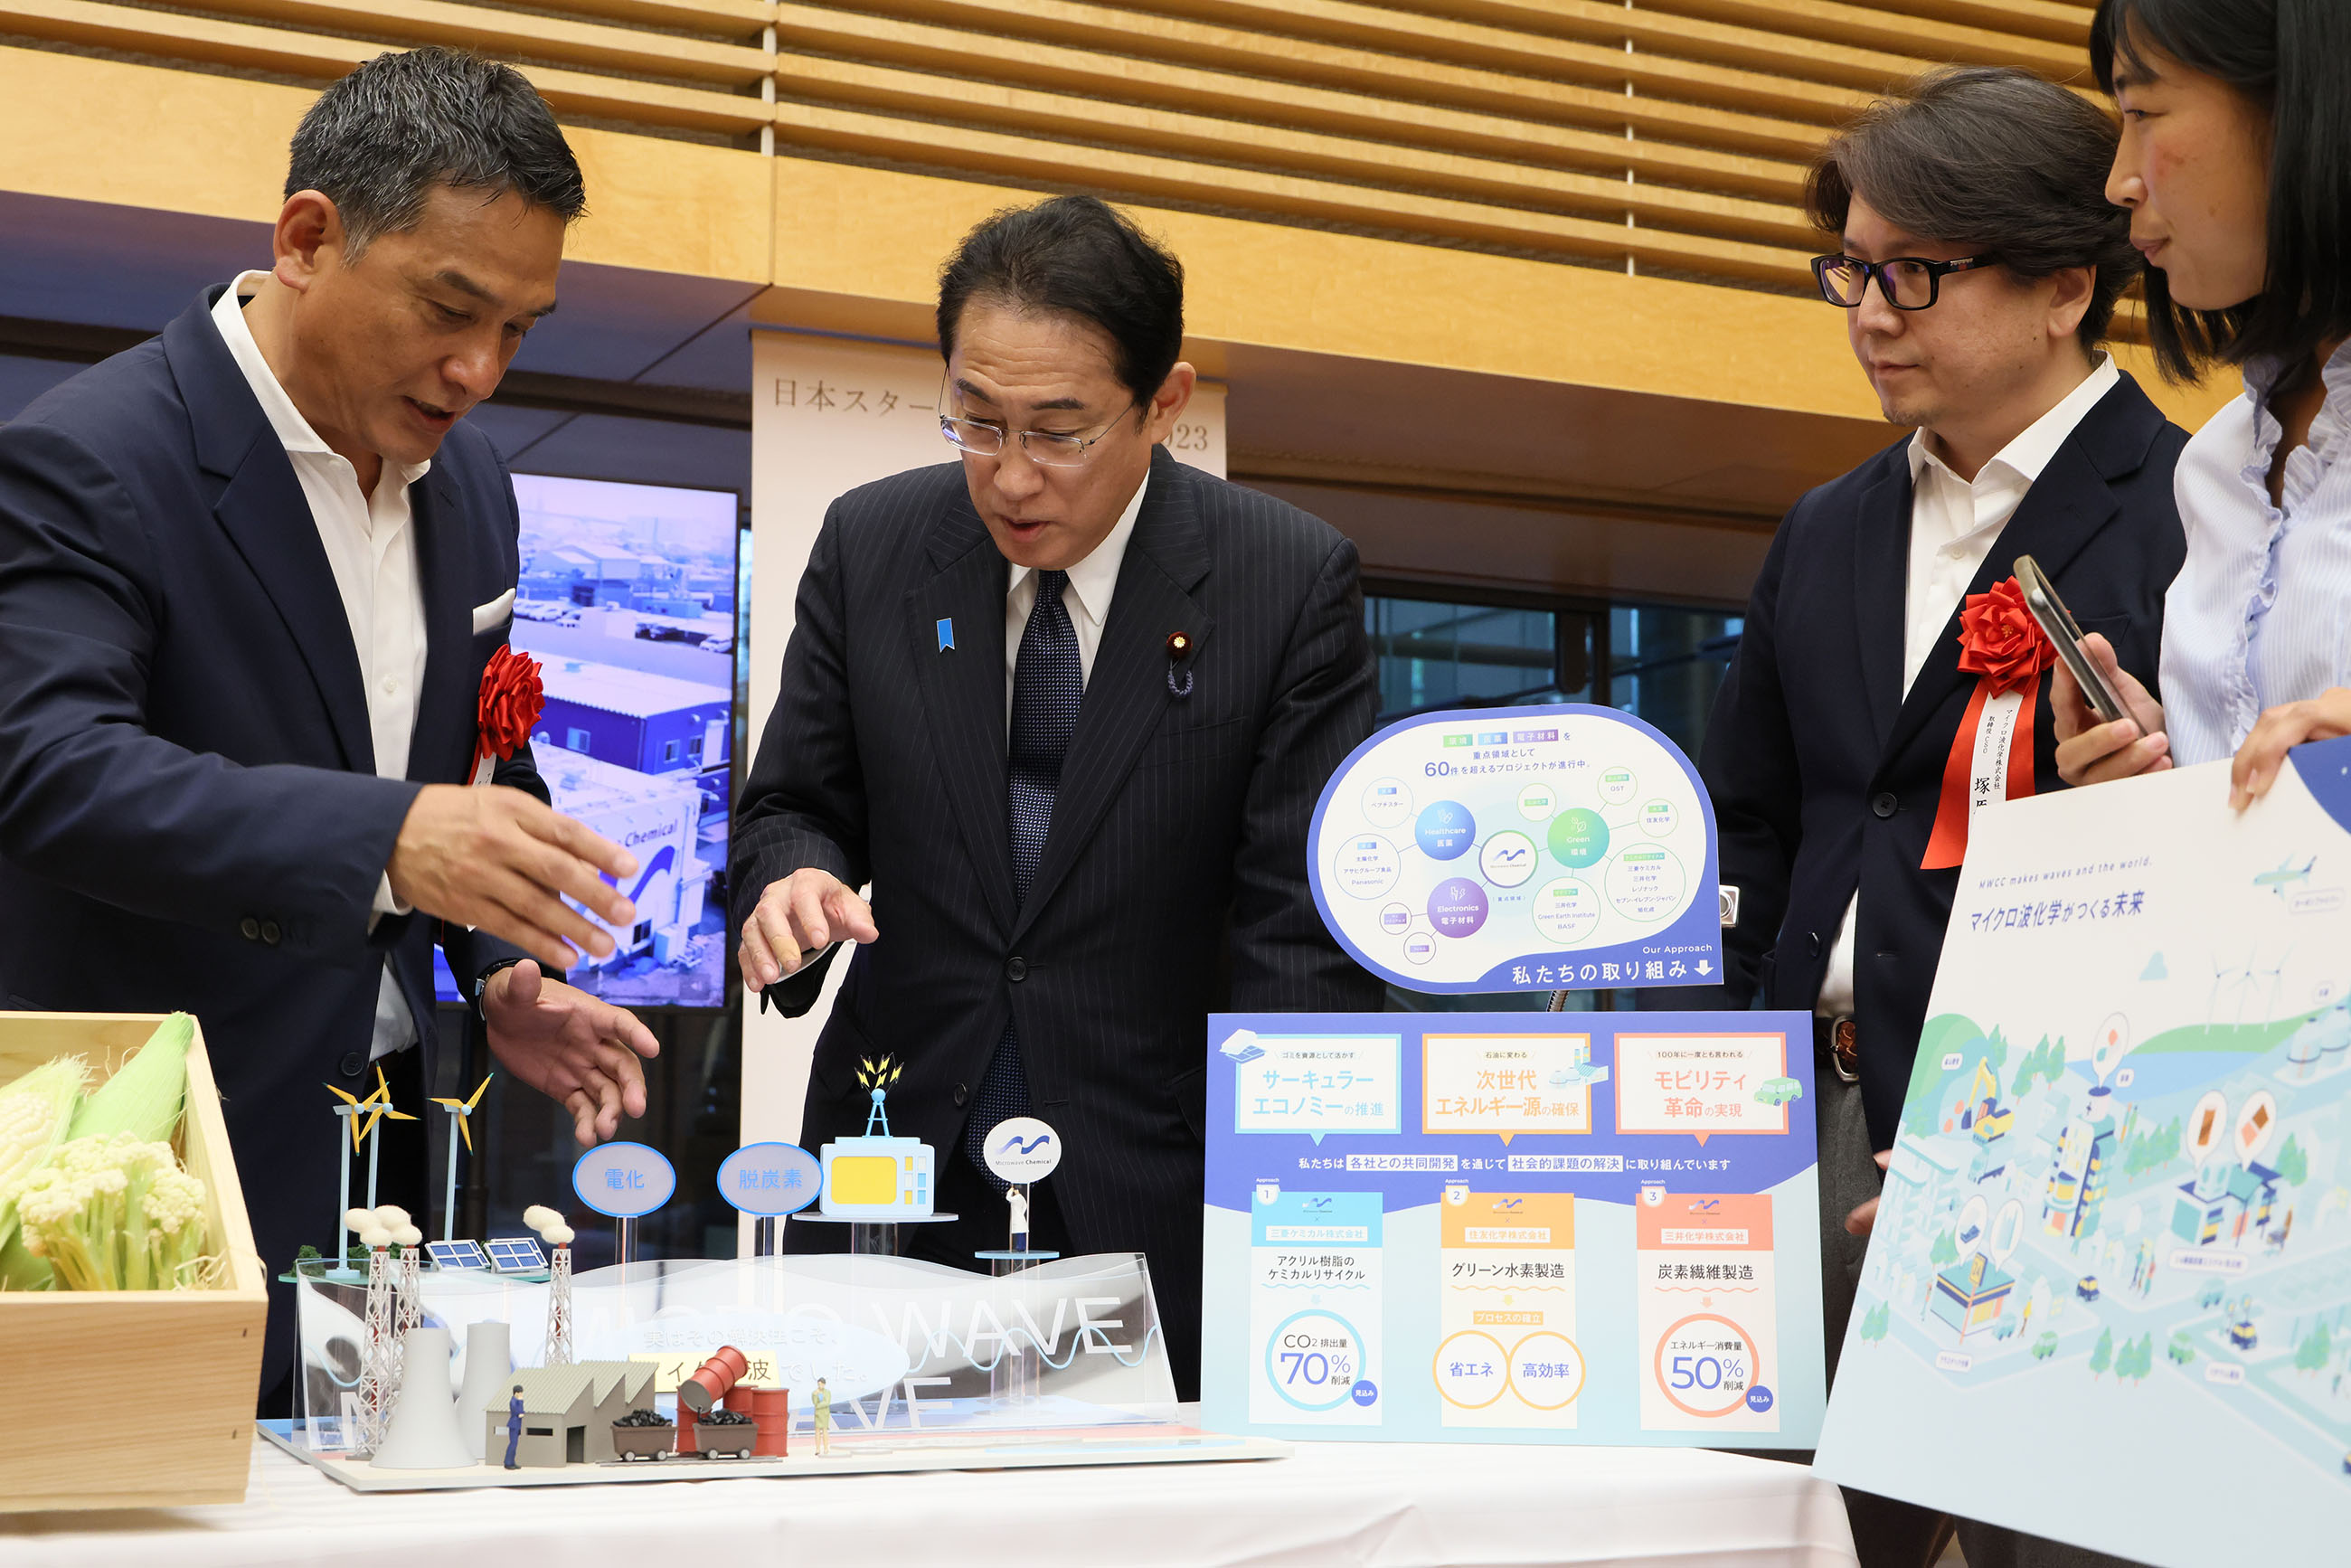 Prime Minister Kishida viewing the exhibition booth of award winners (5)